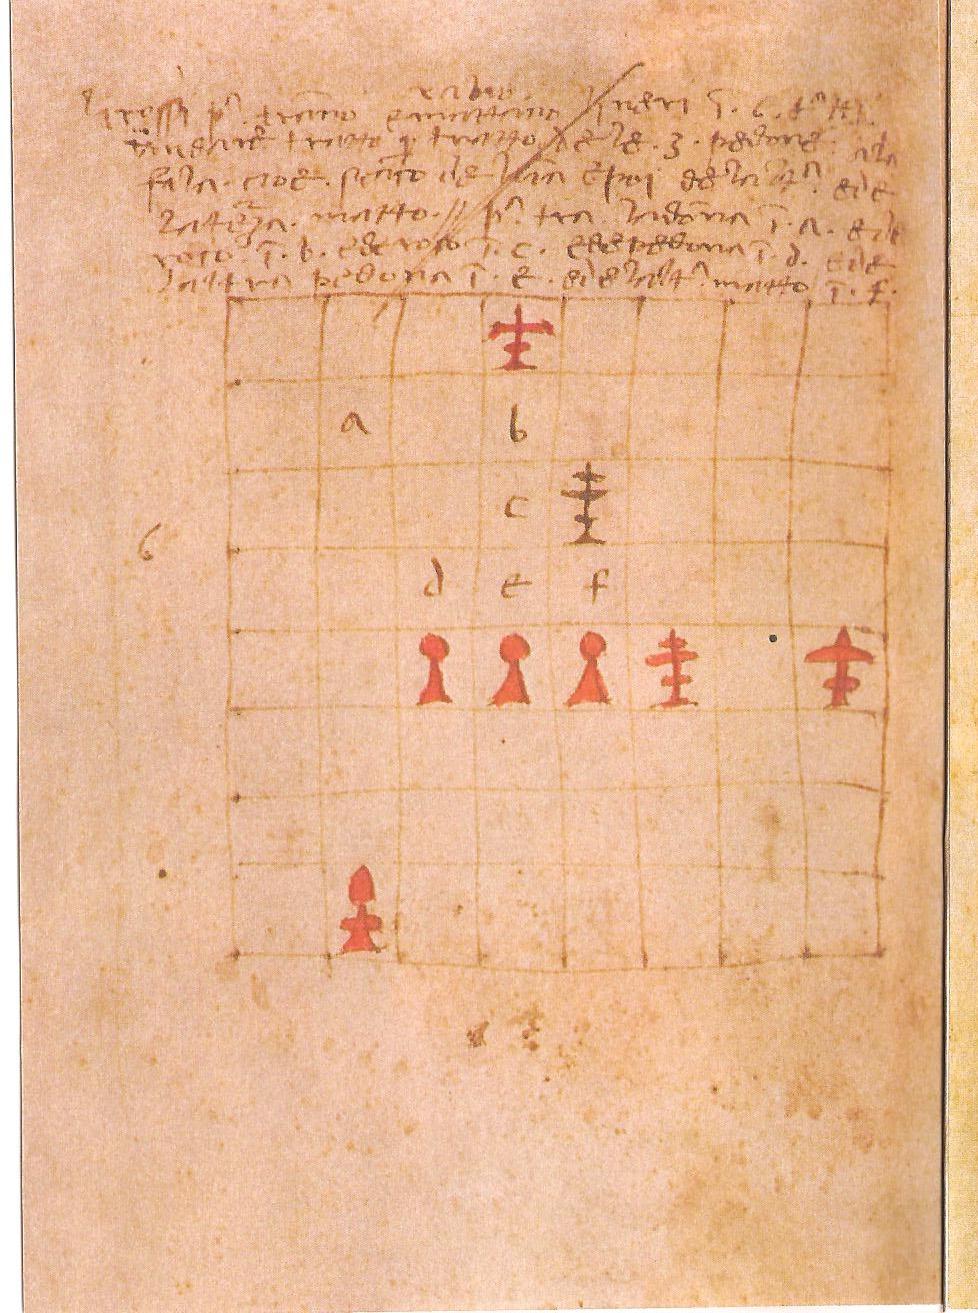 Plate 1 Folio 8v. The problem depicted is to be played with actual modern rules, in fact, and is distinguished at the top center of the page by the term "rabio".